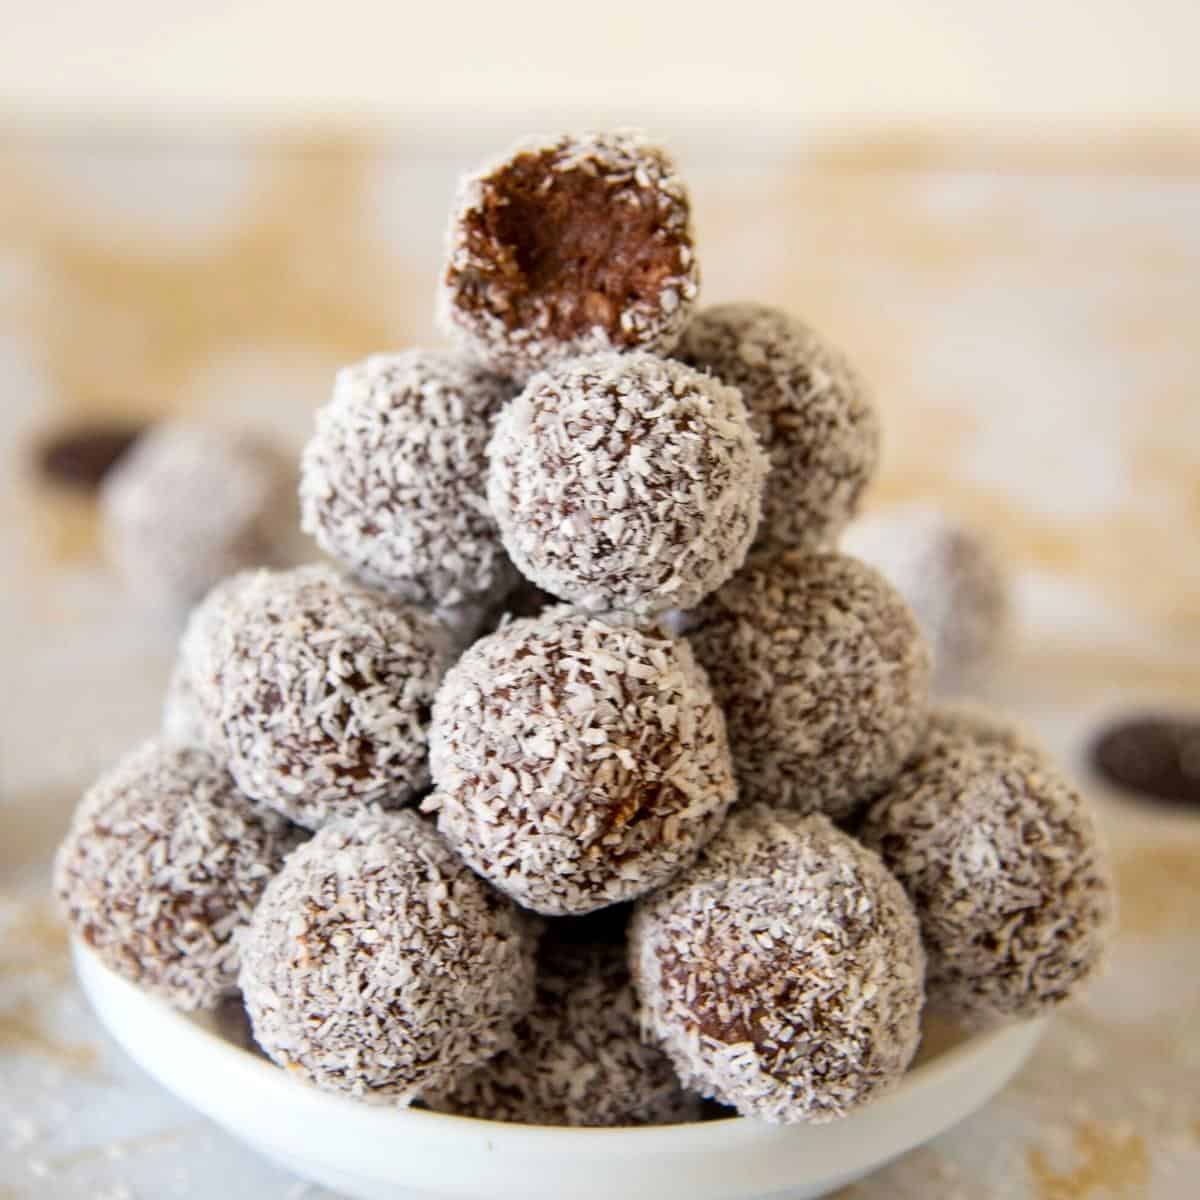 A stack of coconut truffles